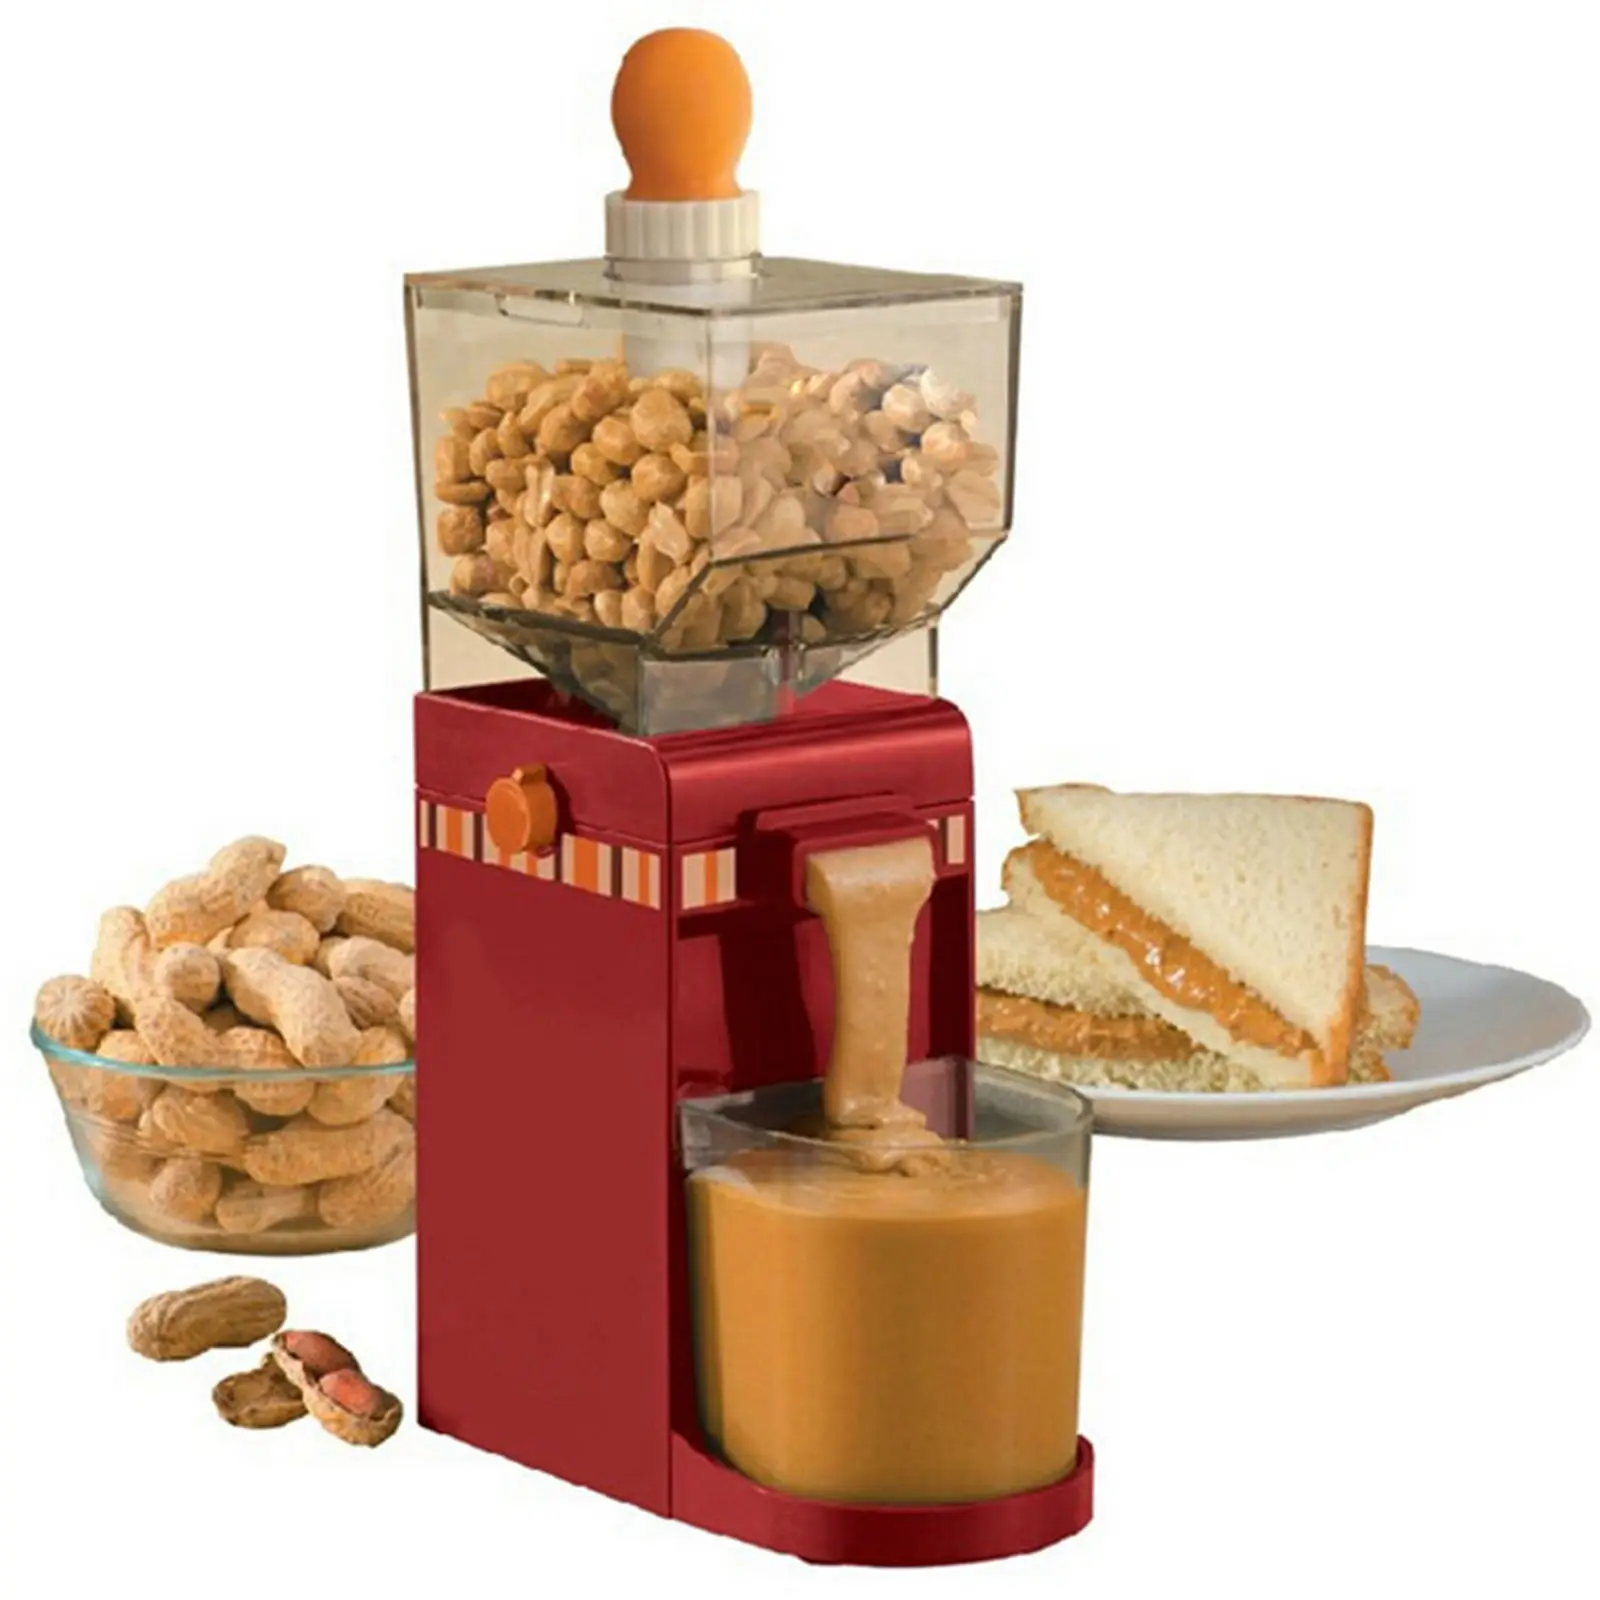 

Household Peanut Butter Machine Home Appliances One-Touch Control for Jam Easy Clean Kitchen Fitting EU Plug